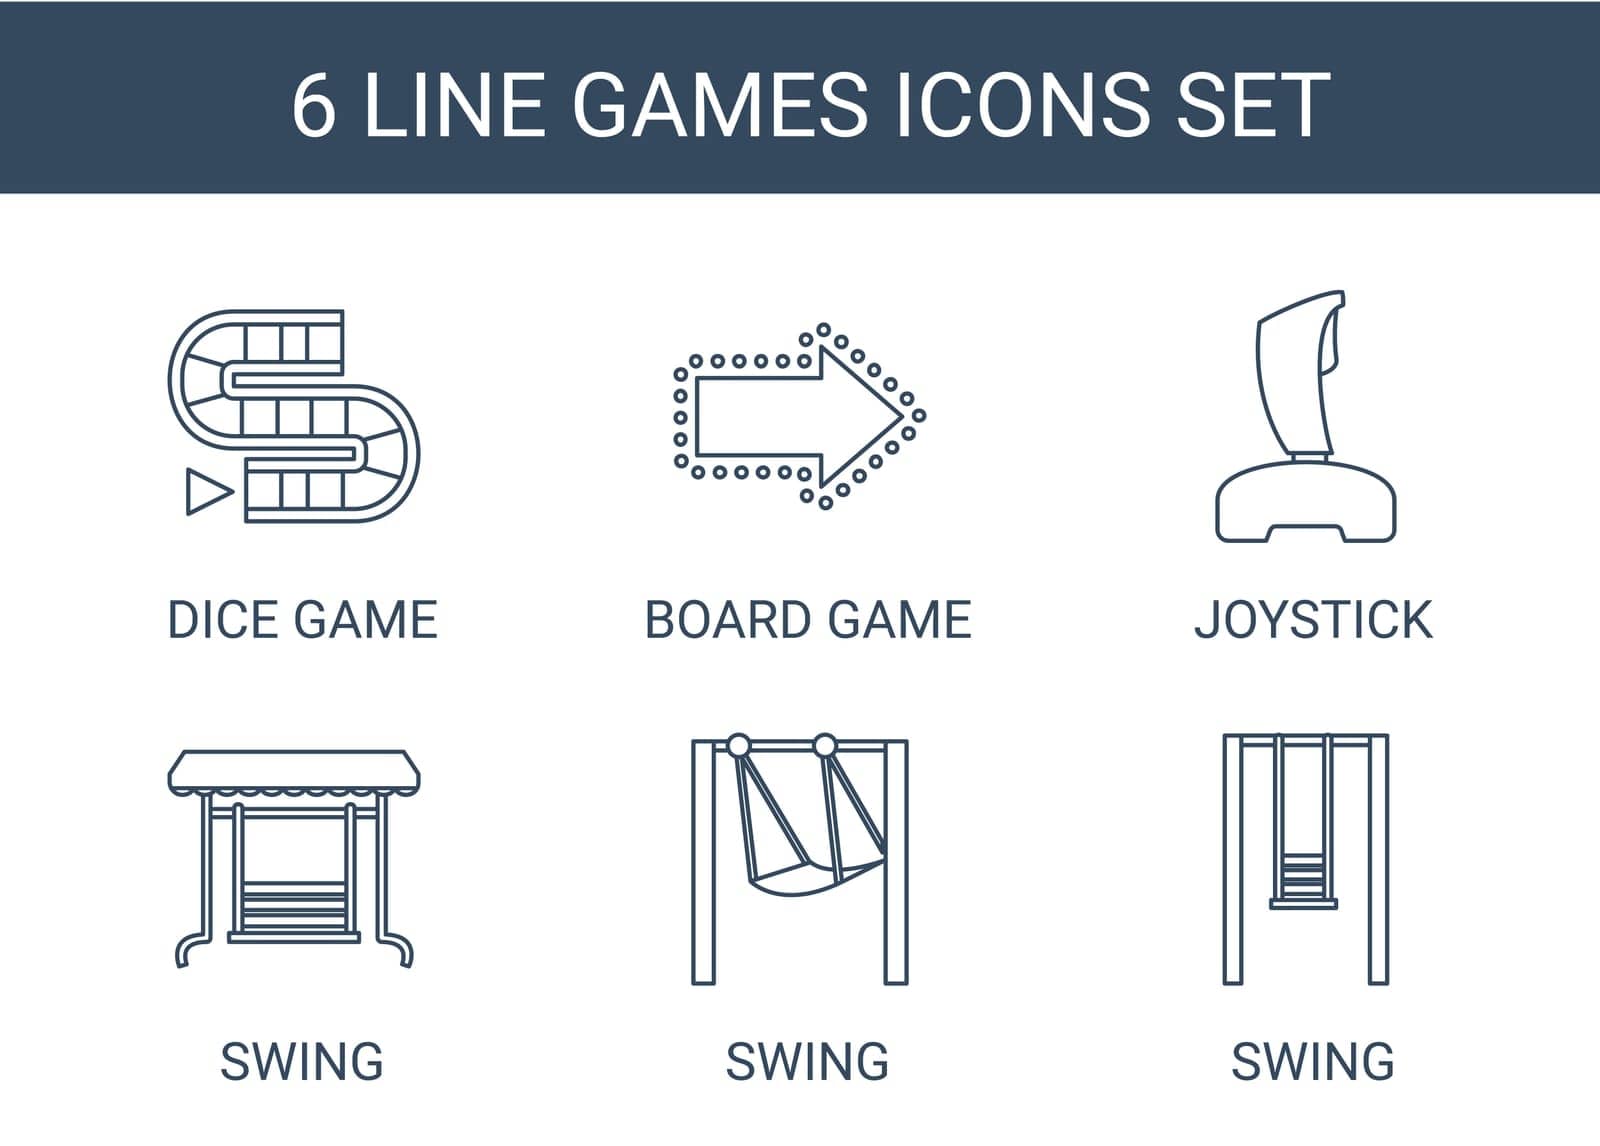 play,symbol,game,kid,icon,dice,isolated,back,video,button,white,furniture,flat,design,games,drawing,playground,vector,leisure,graphic,image,art,chess,set,black,joystick,girl,seat,outdoor,swing,painting,background,silhouette,sing,playing,illustration,swinging,fun,board,object